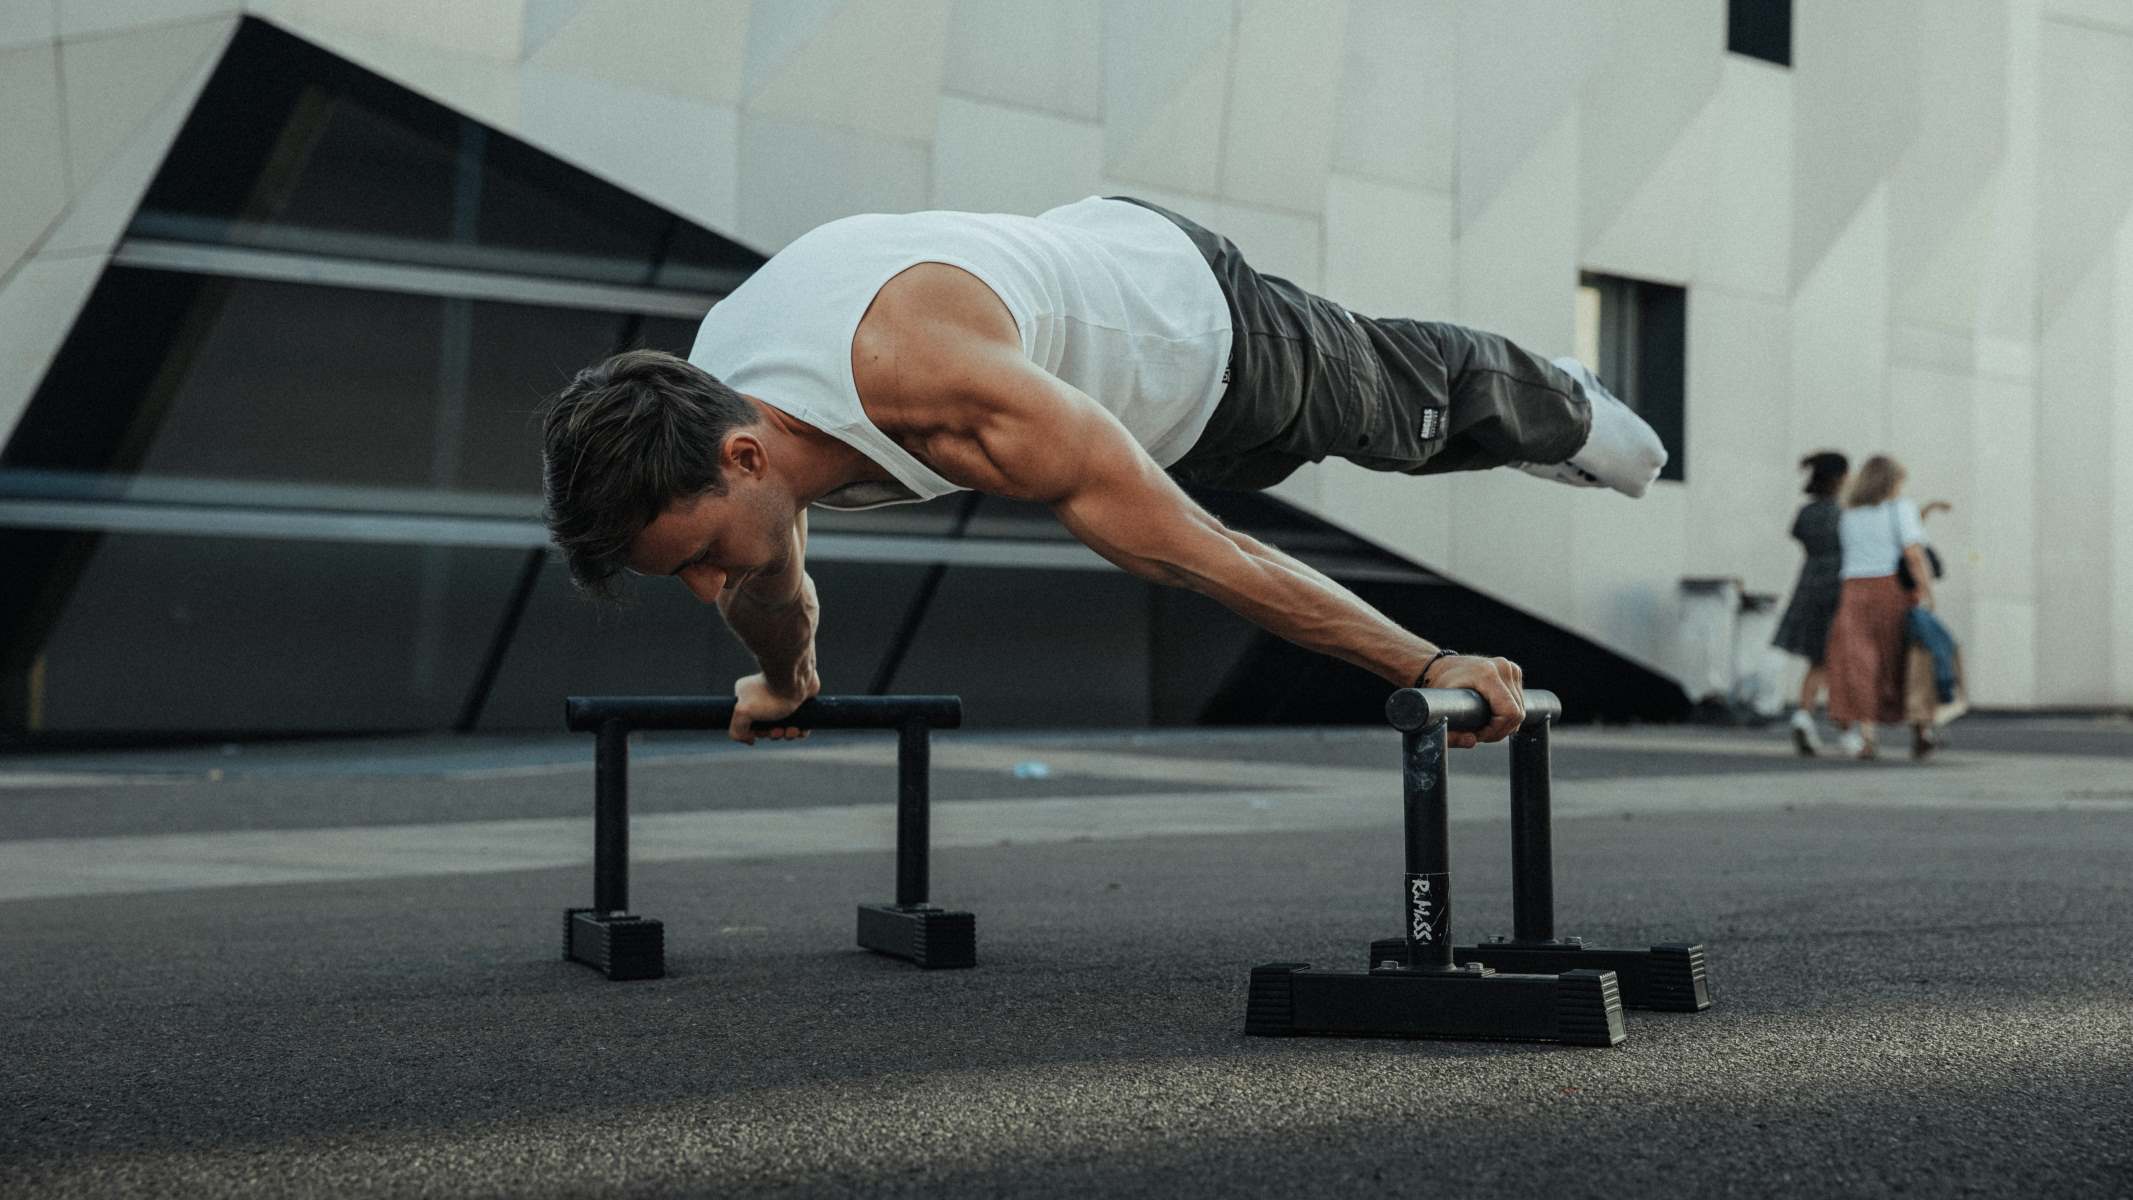 The Ultimate Calisthenics Workout Routine For Beginners With No Equipment